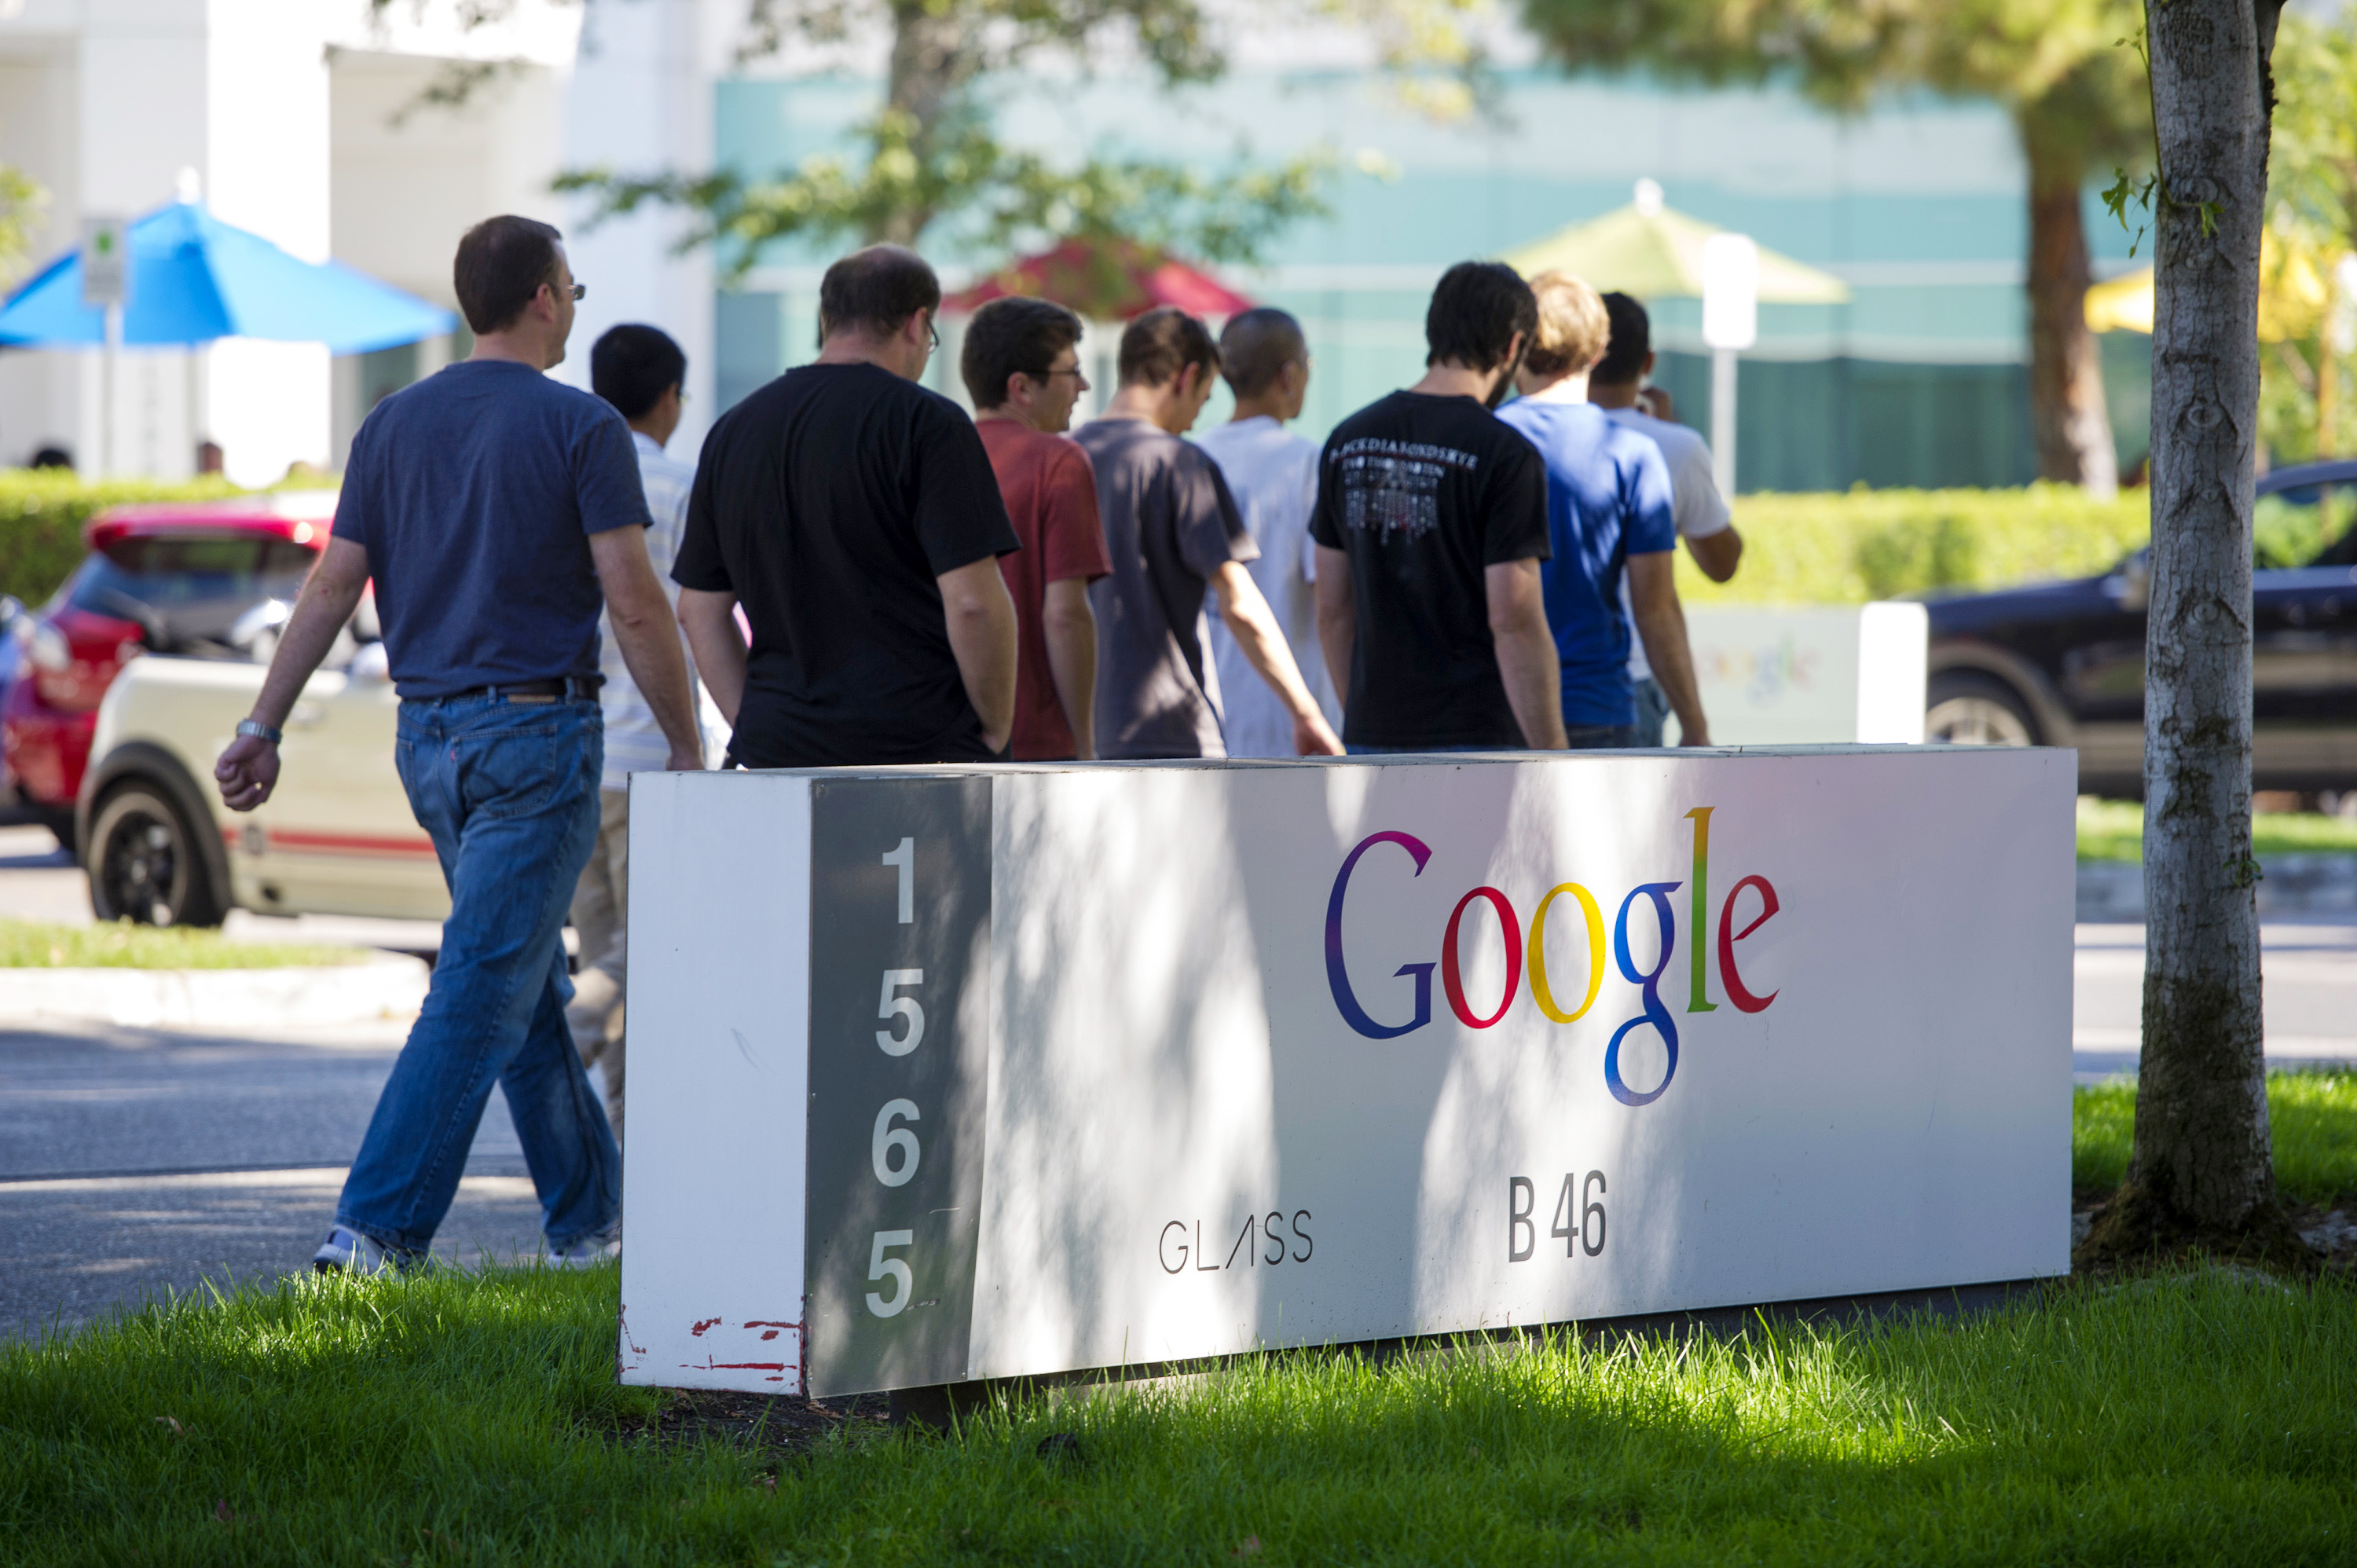 Pedestrians walk past Google Inc. signage displayed in front of the company's headquarters in Mountain View, Calif. on Sept. 27, 2013. 